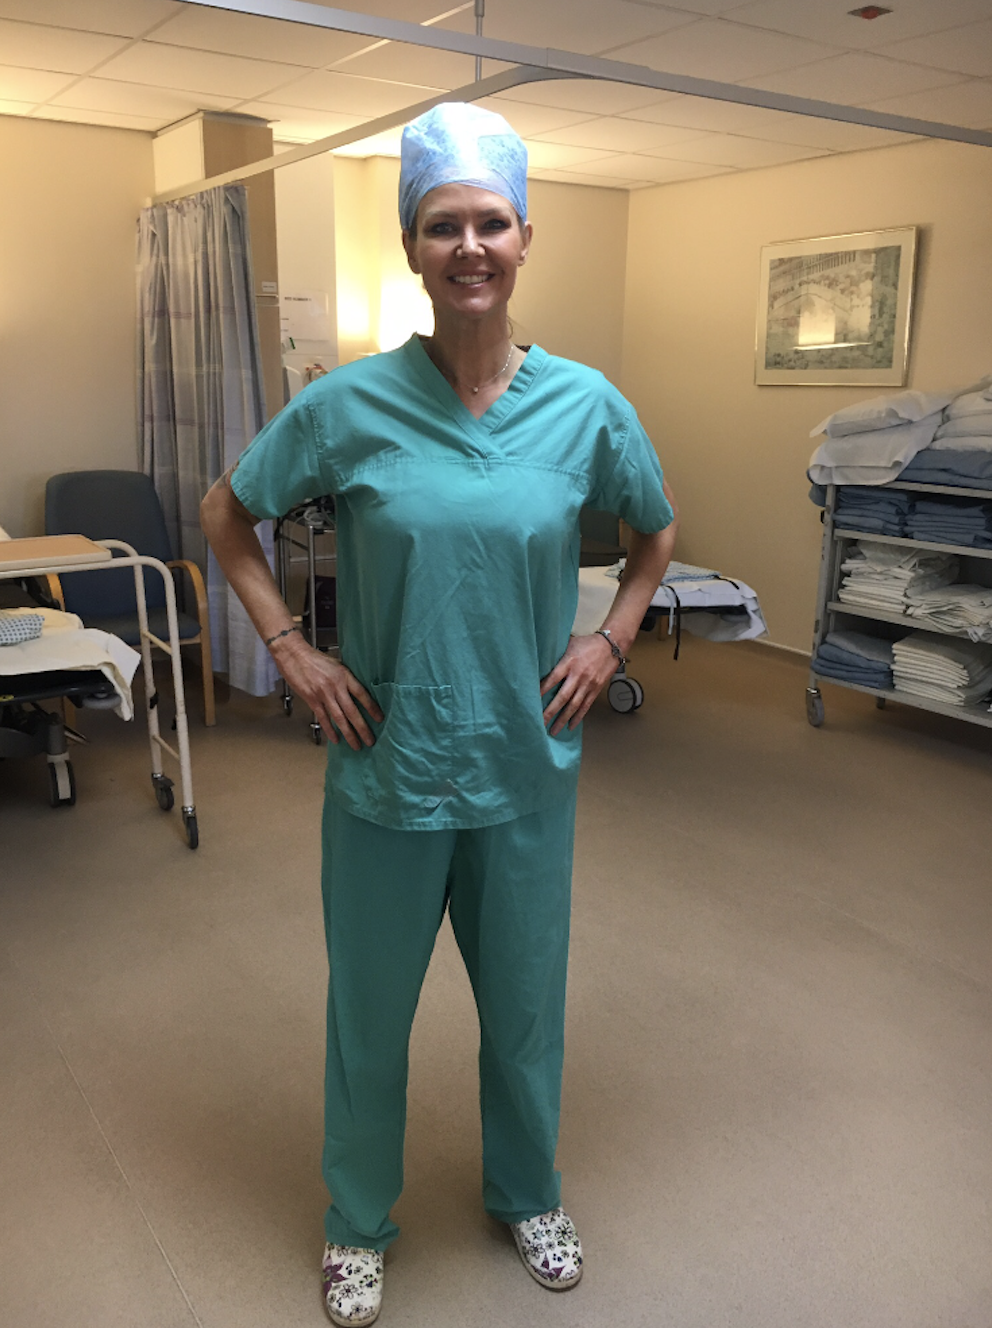 Vicky Martin 2017 Review - image of hospital visit when Vicky was invited to see the nipple reconstruction by a surgeon and patient, following breast cancer treatment